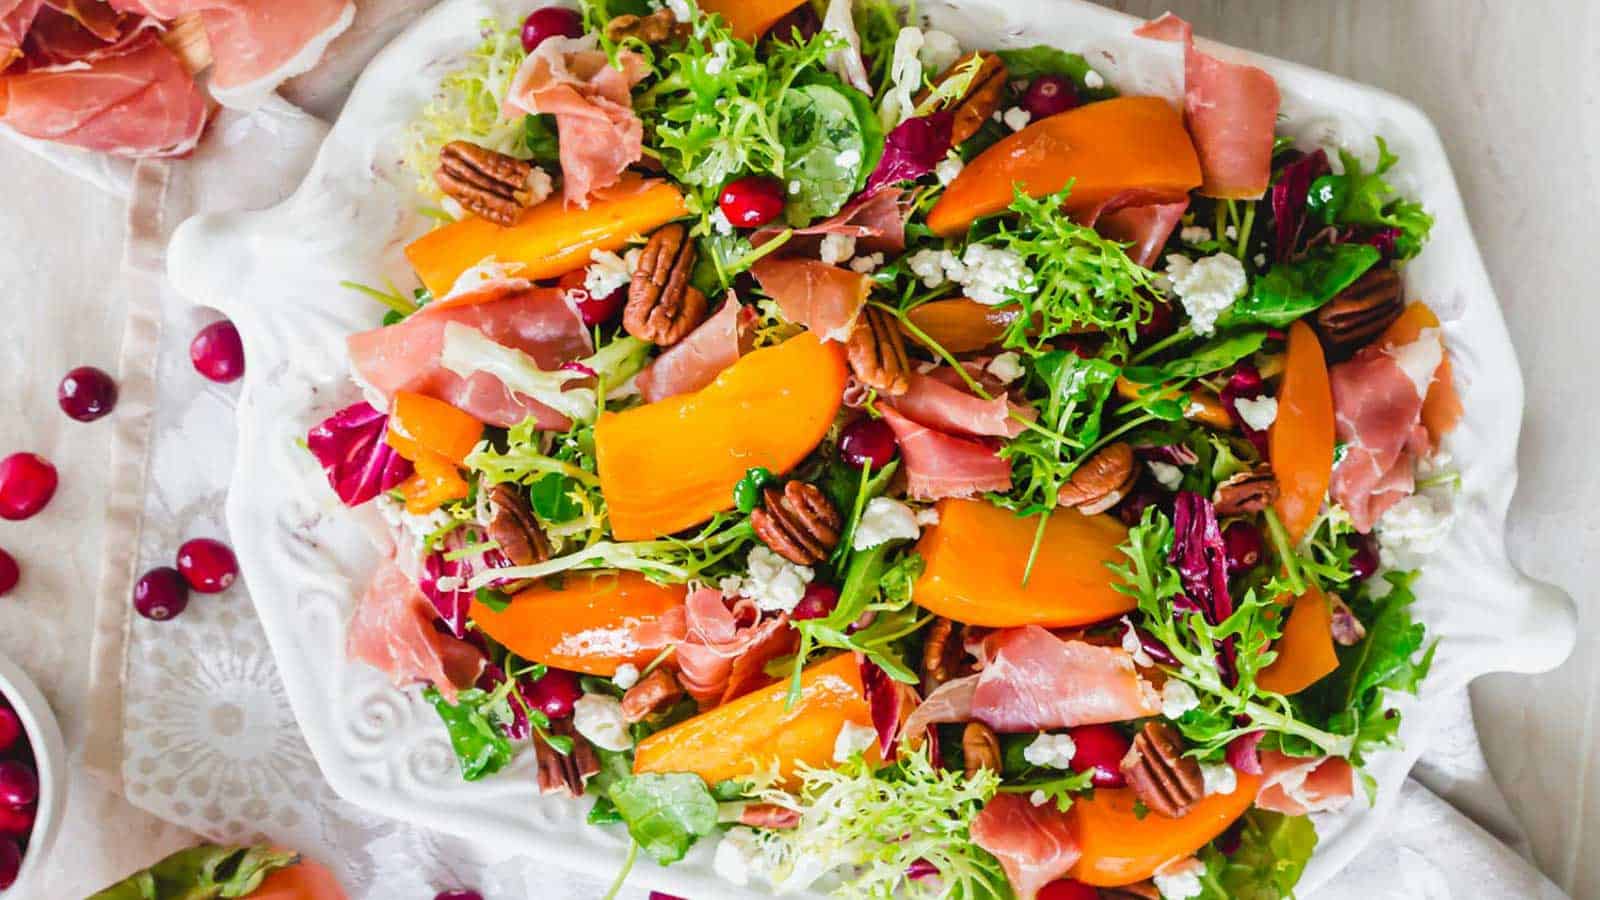 Persimmon salad with greens, prosciutto, cranberries and pecans on a white serving platter.